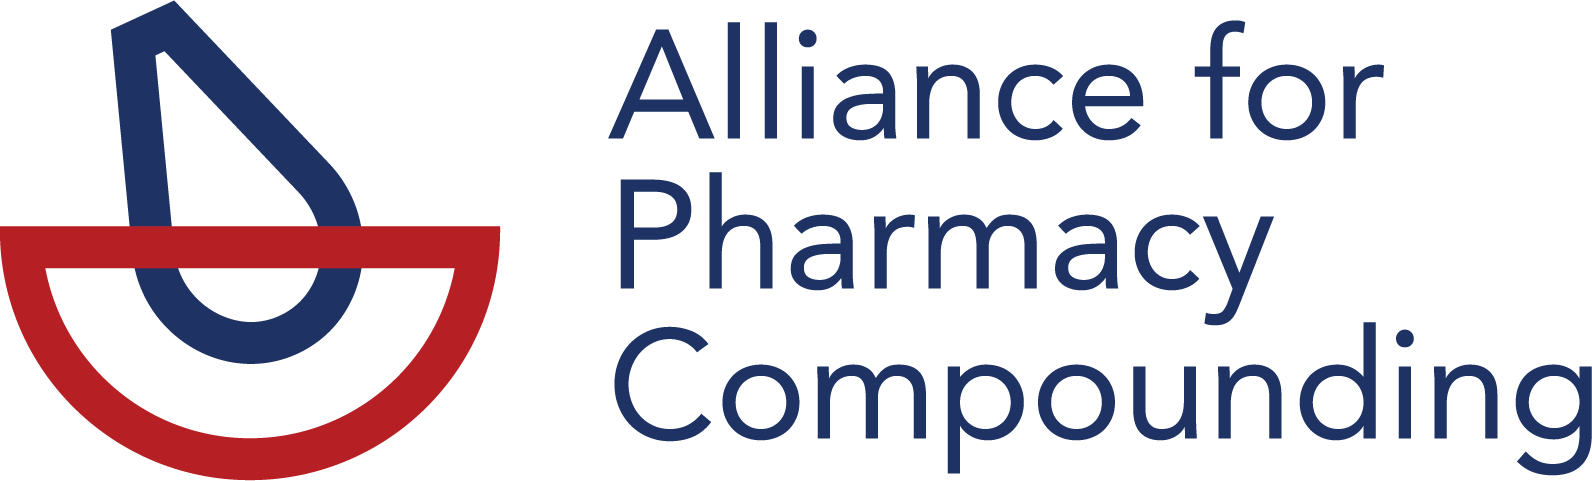 Alliance for Compounding Pharmacists